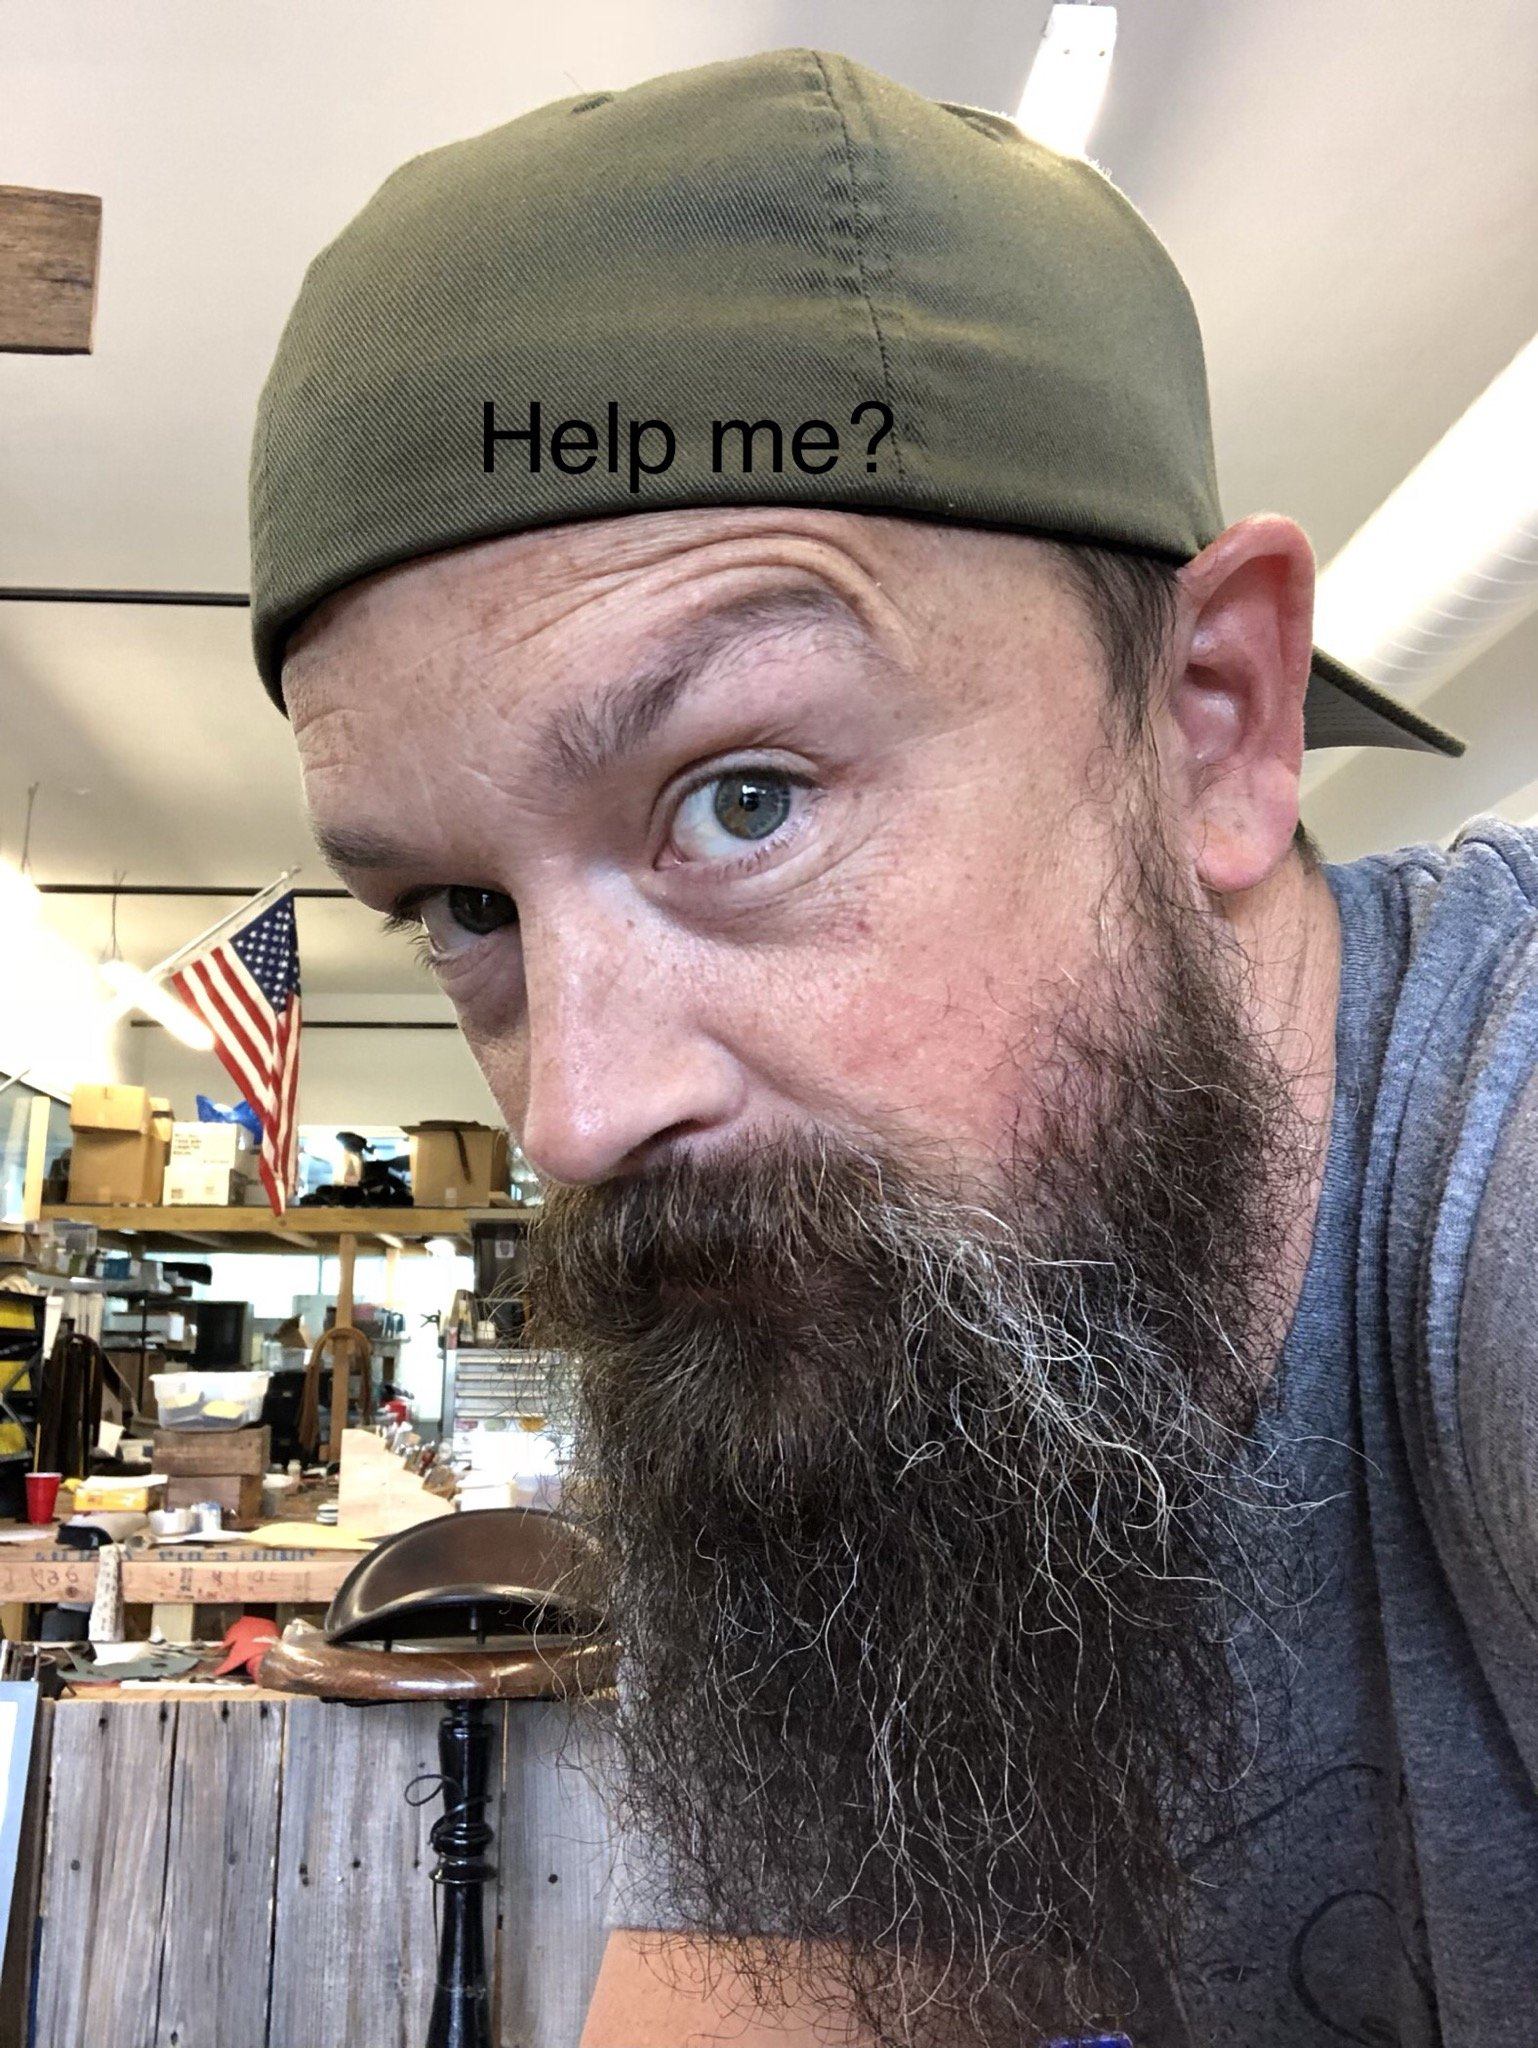 Do You Think You Could Help!?